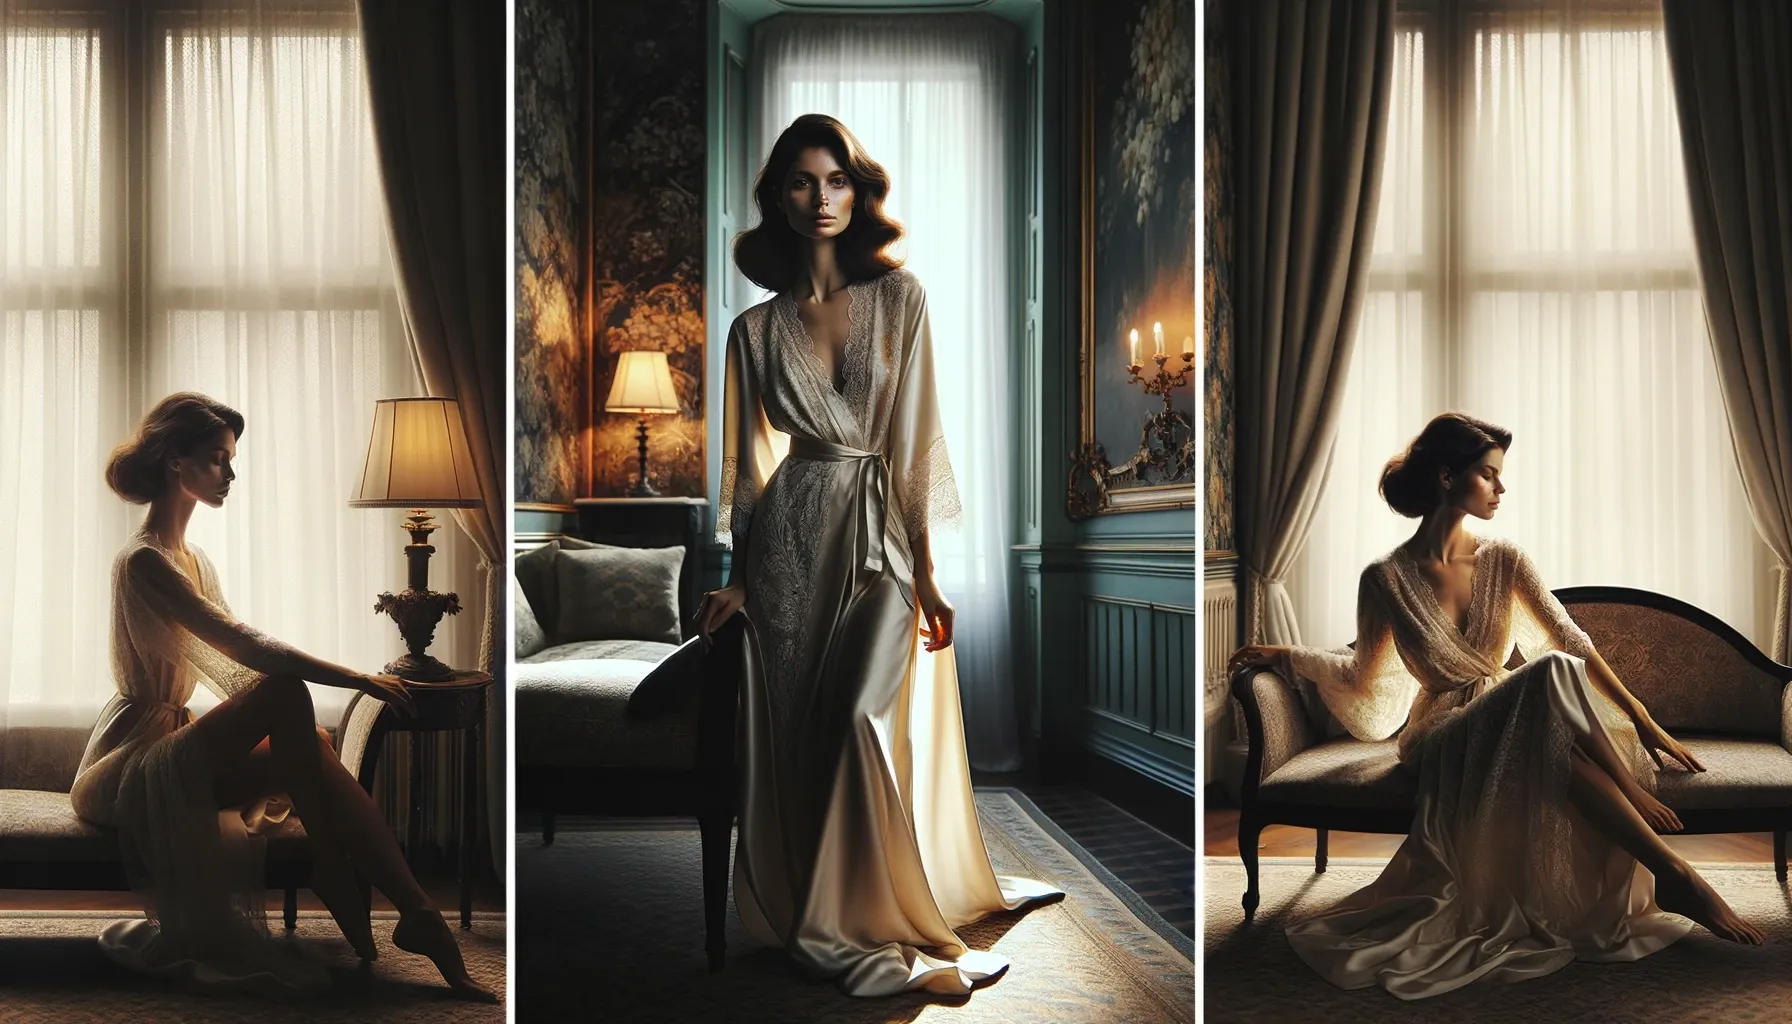 Timeless Boudoir Portraits: Capturing The Essence Of Beauty And Confidence